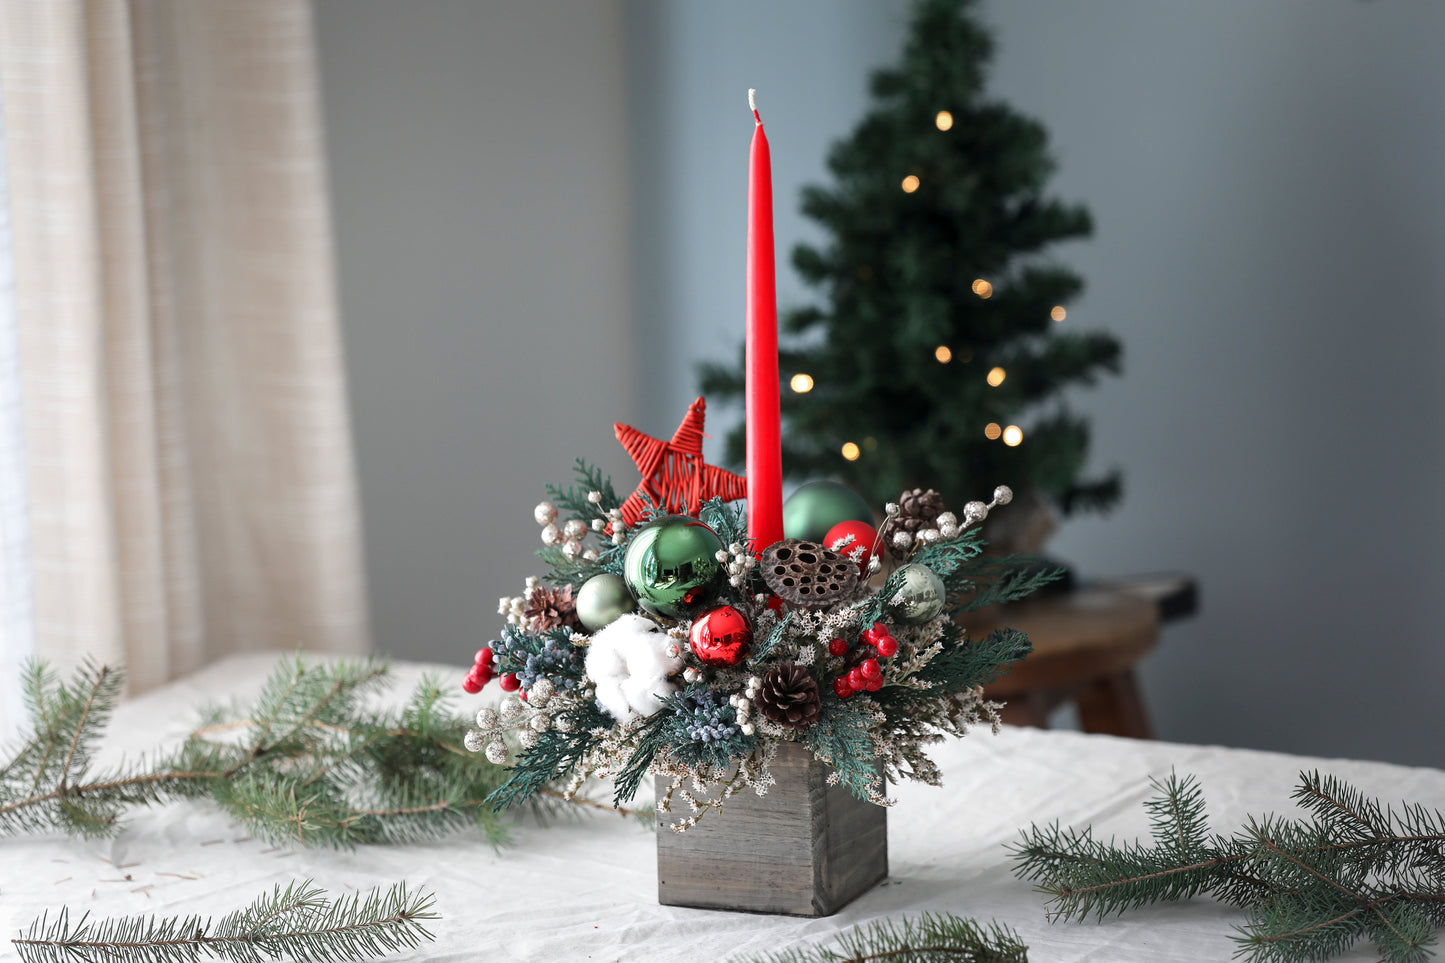 Ornaments & Red Star Candle Centerpiece